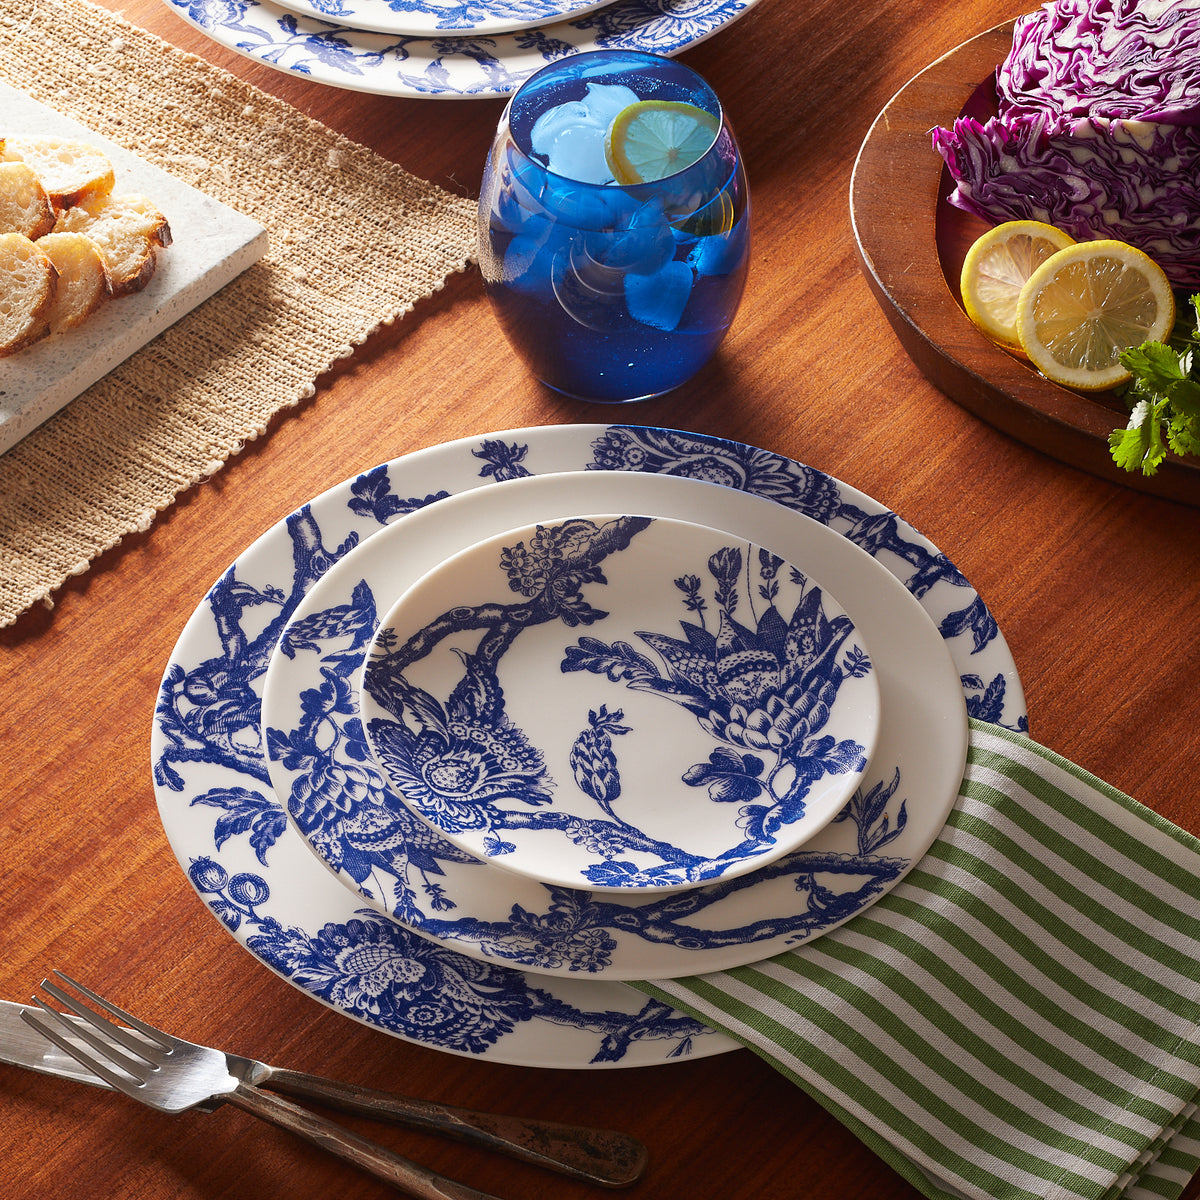 A place setting with blue and white floral-patterned Arcadia Rimmed Salad Plate from Caskata Artisanal Home on a wooden table, a striped green napkin, a blue glass, a salad with lemon, and sliced bread on a cutting board.